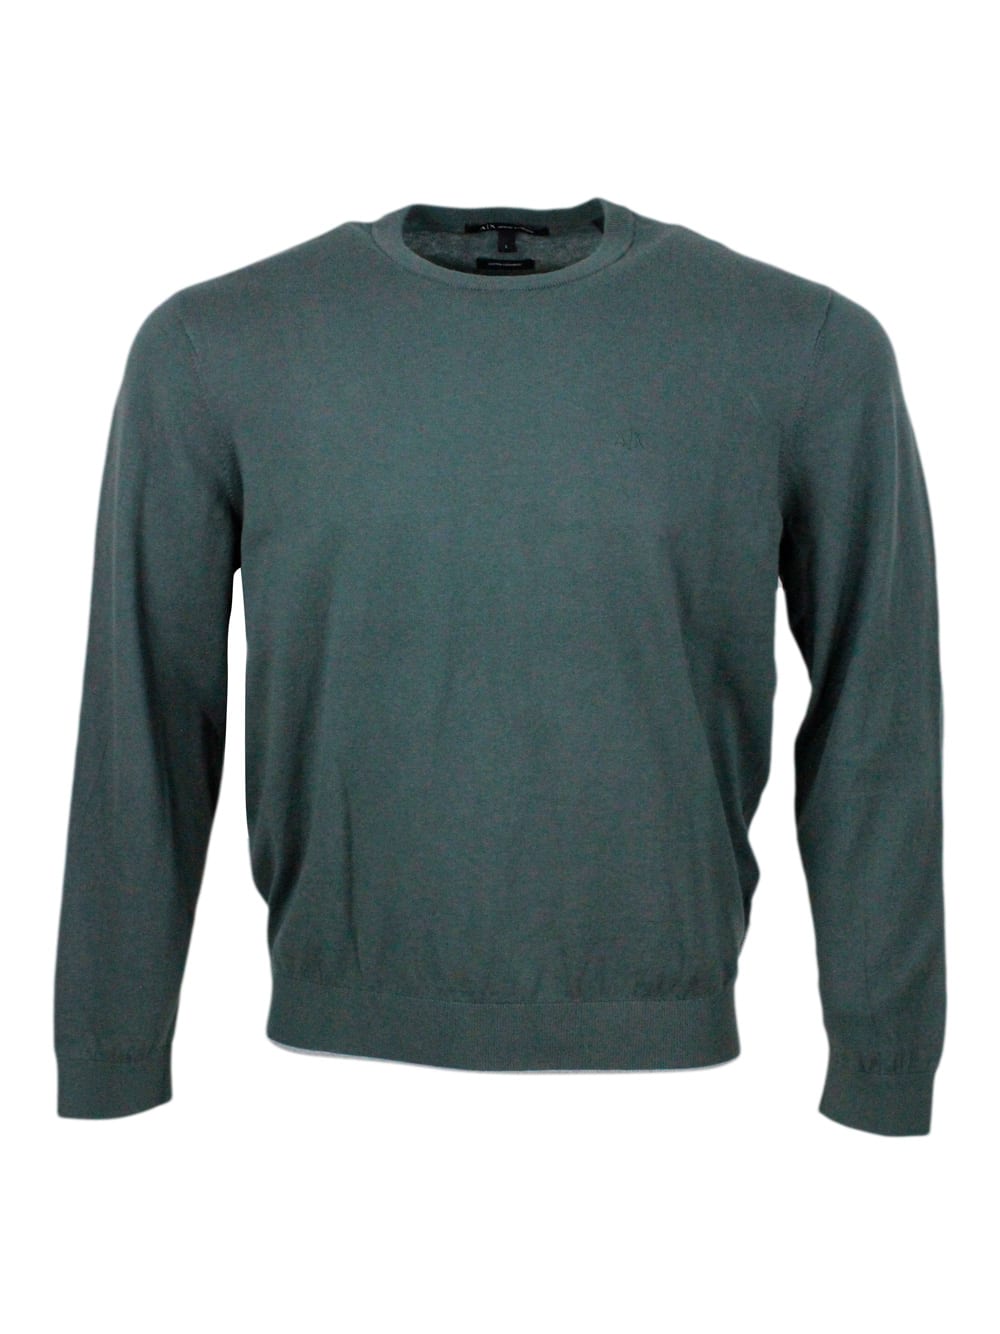 Shop Armani Collezioni Lightweight Long-sleeved Crew-neck Sweater Made Of Warm Cotton And Cashmere With Contrasting Color P In Verde Urban Chic